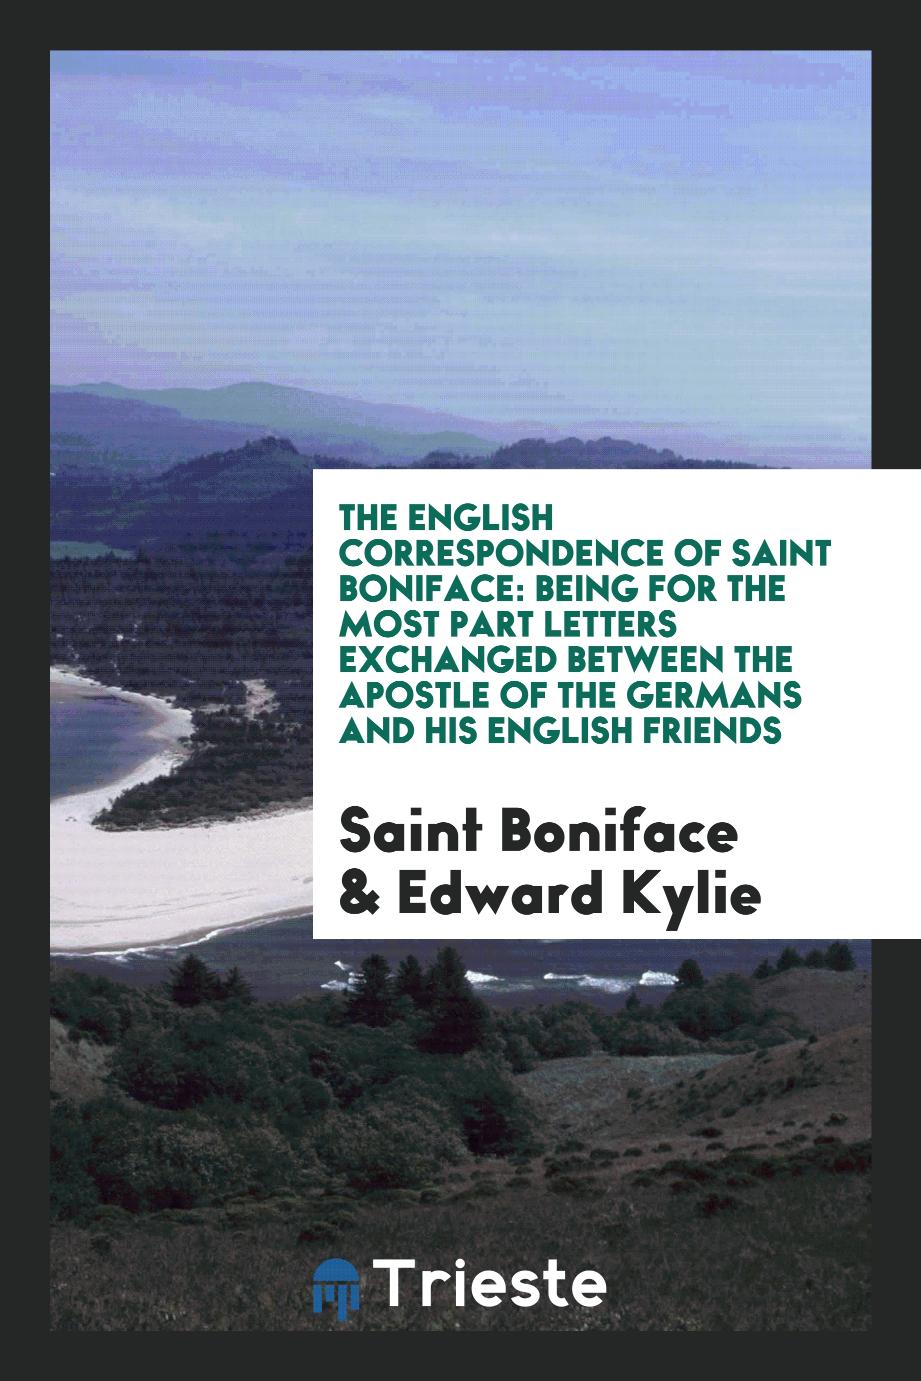 The English correspondence of Saint Boniface: being for the most part letters exchanged between the Apostle of the Germans and his English friends